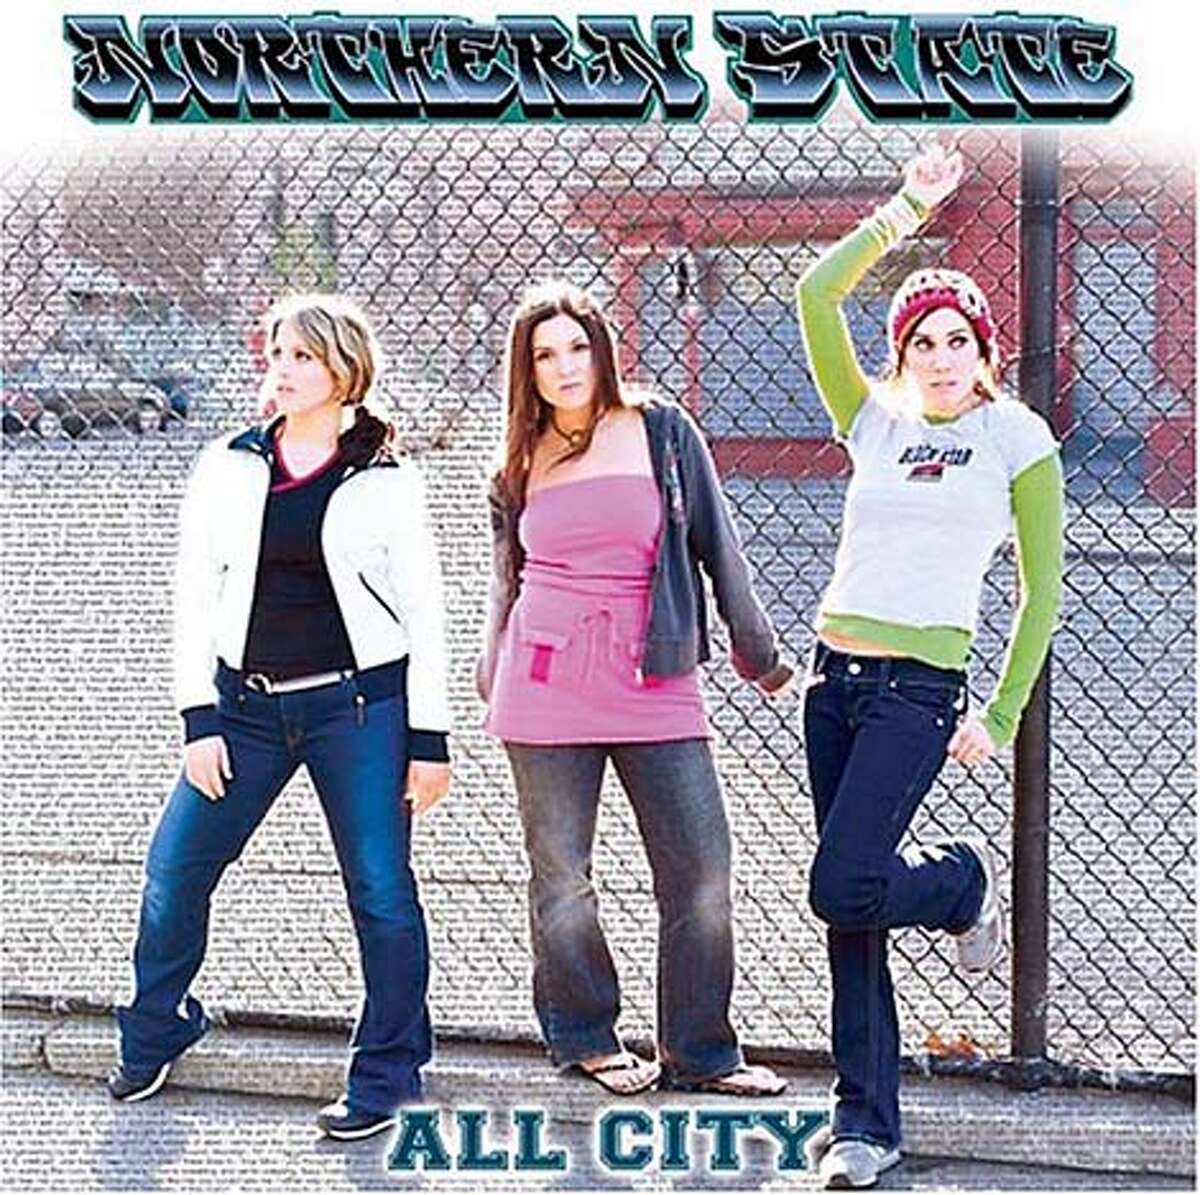 Northern State's "All City"